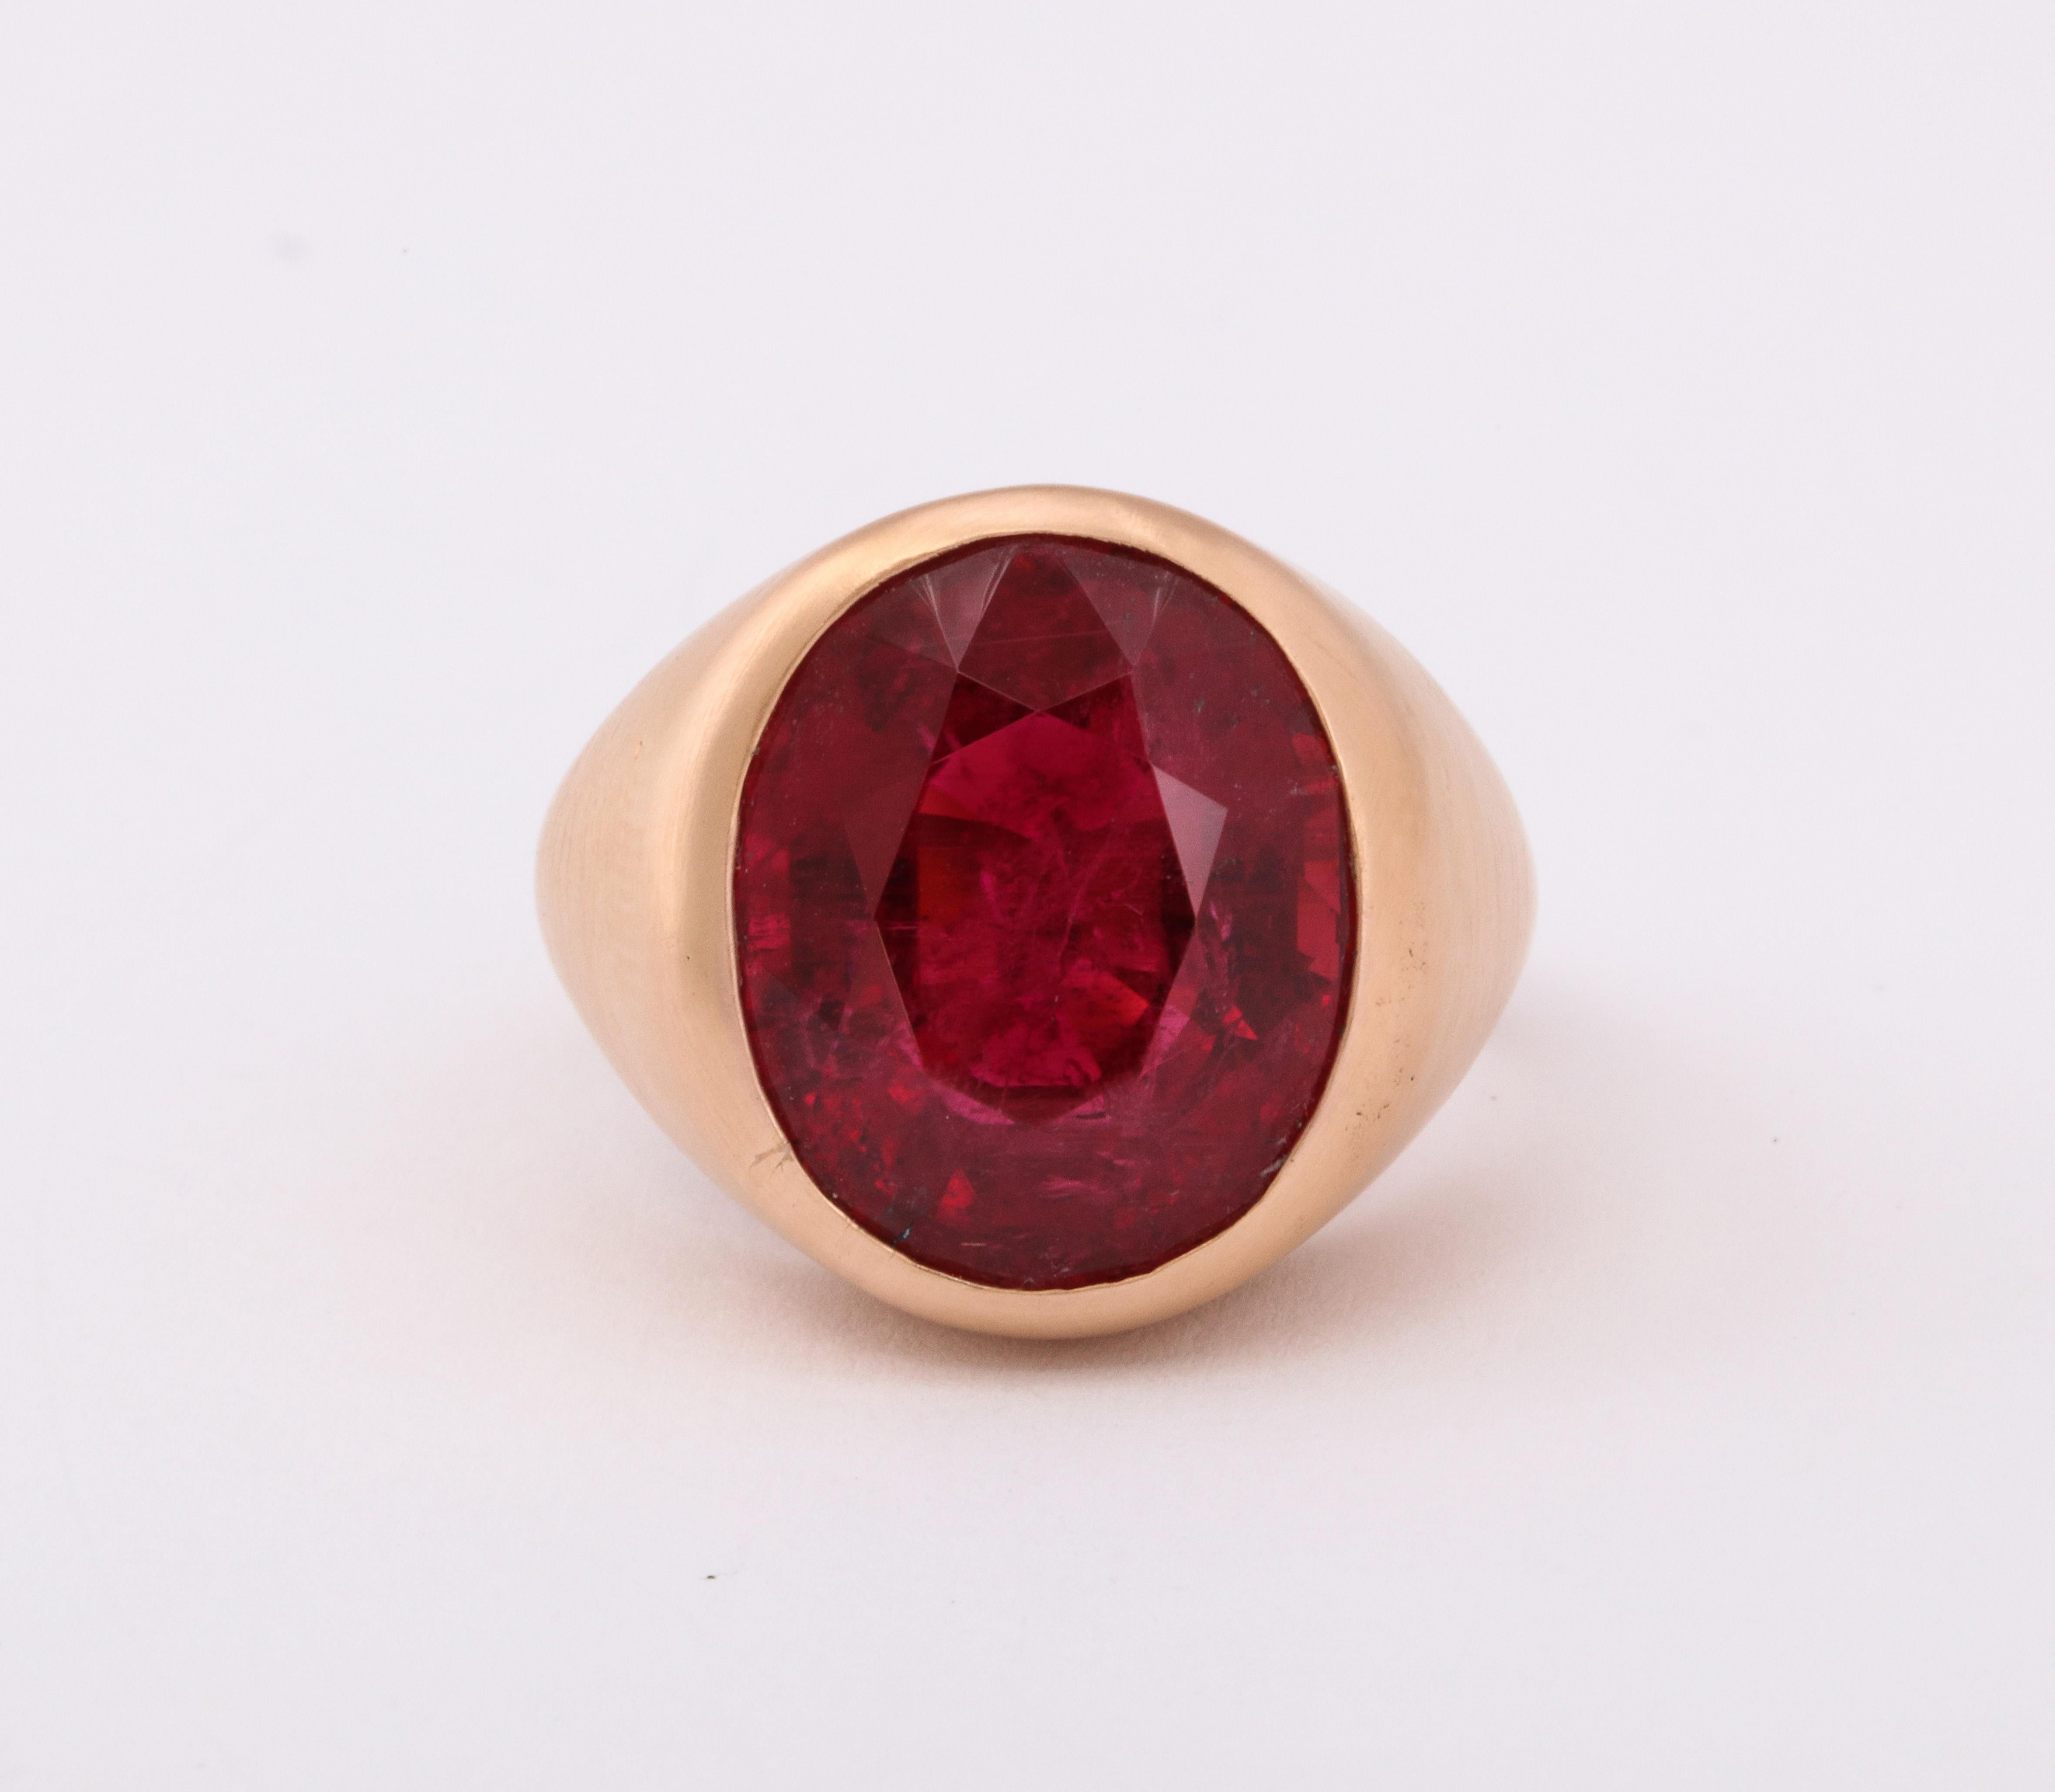  Men's Rubellite Solitaire Ring set in 18K Rose Gold 
Rubellite Weight: 17.64 Cts 
Ring Size: 9
Re- sizable free of charge 